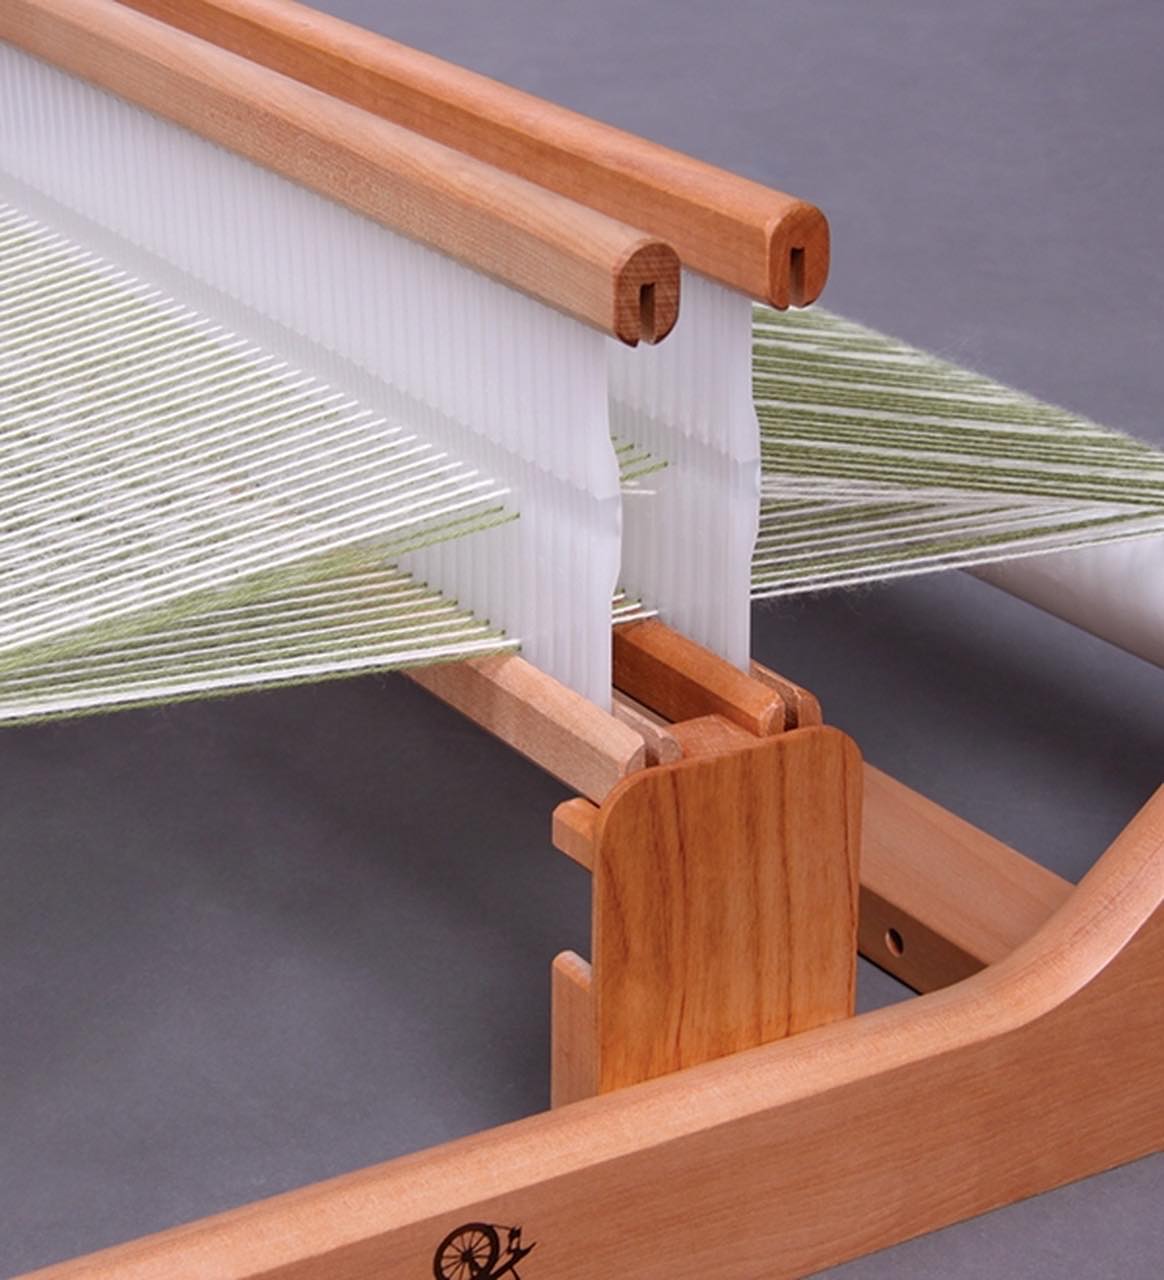 Double Heddle Weaving on a Rigid Heddle Loom